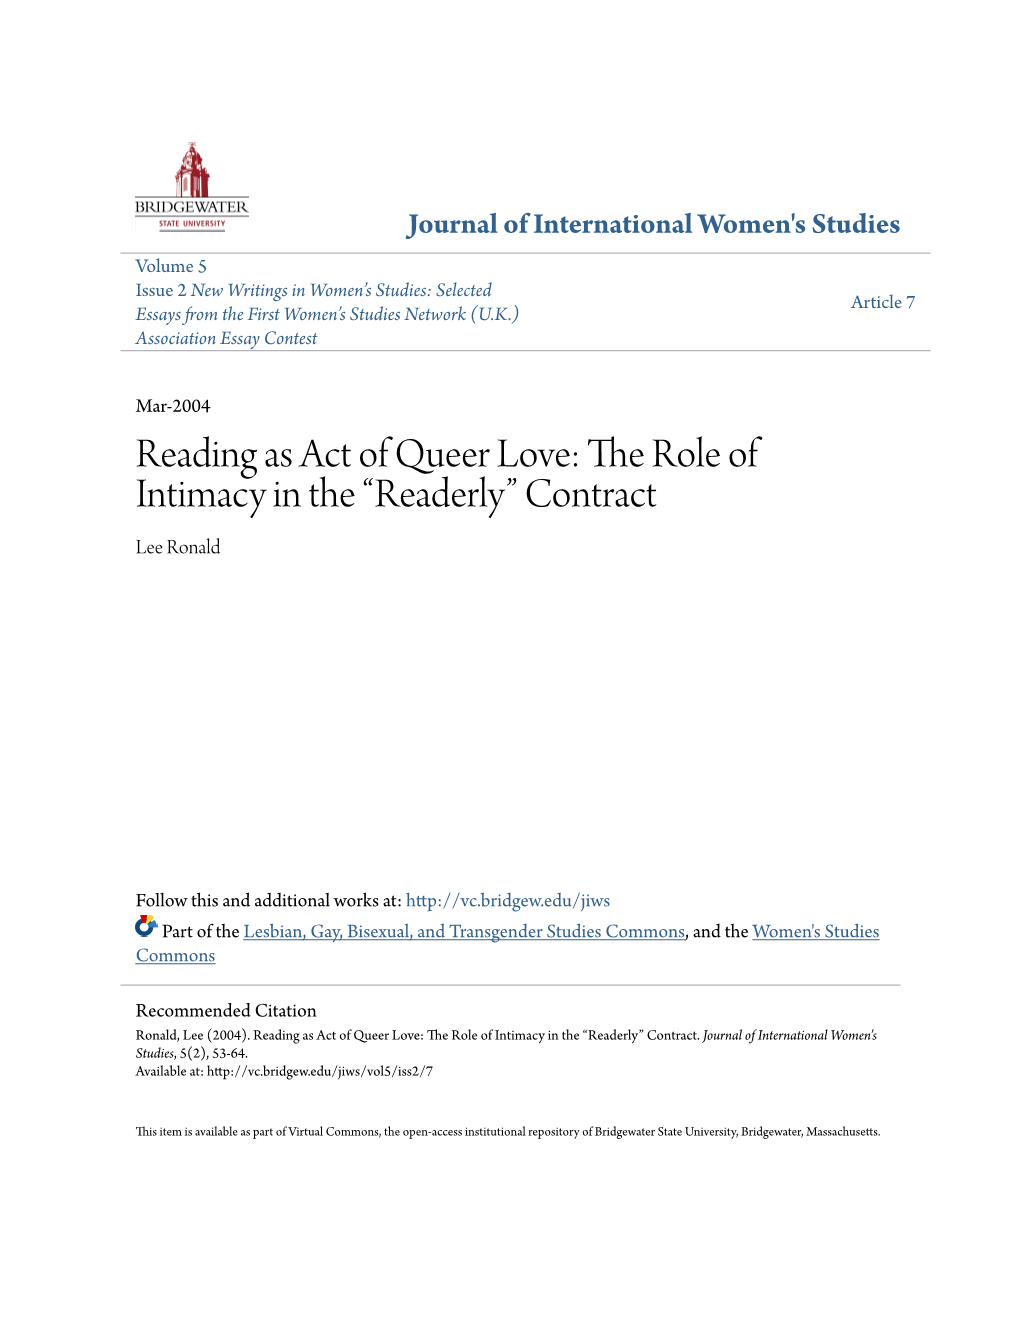 Reading As Act of Queer Love: the Role of Intimacy in the “Readerly” Contract Lee Ronald